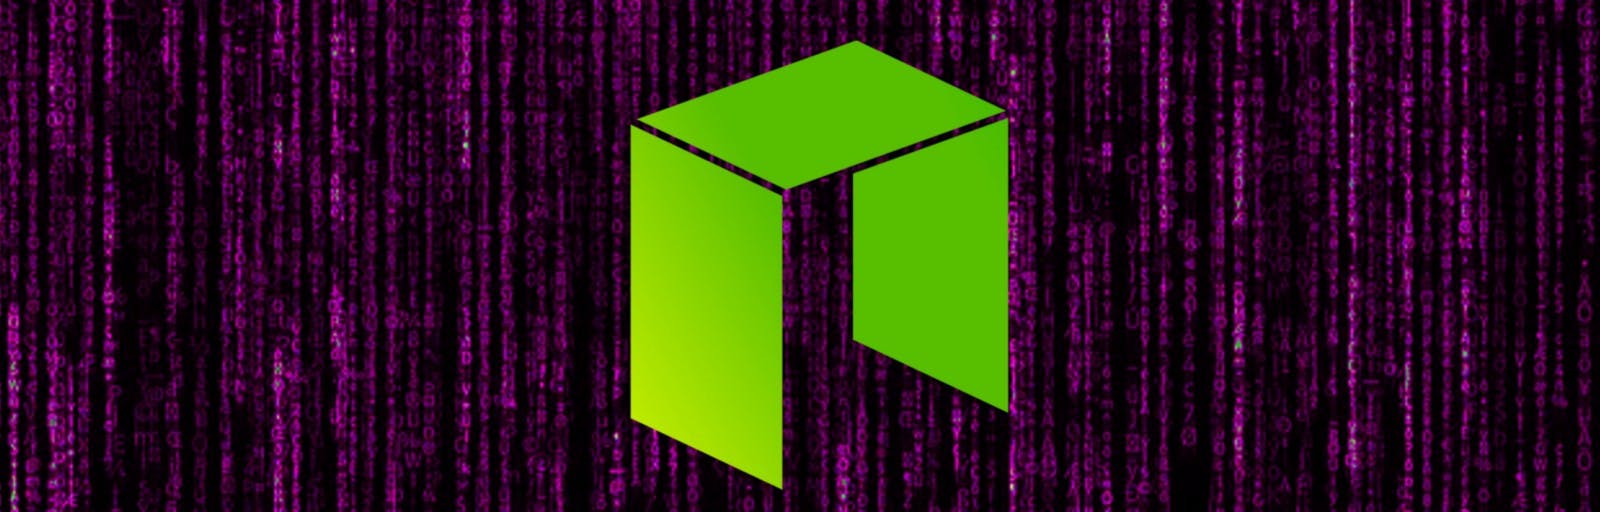 featured image - What is NEO, and what is GAS?